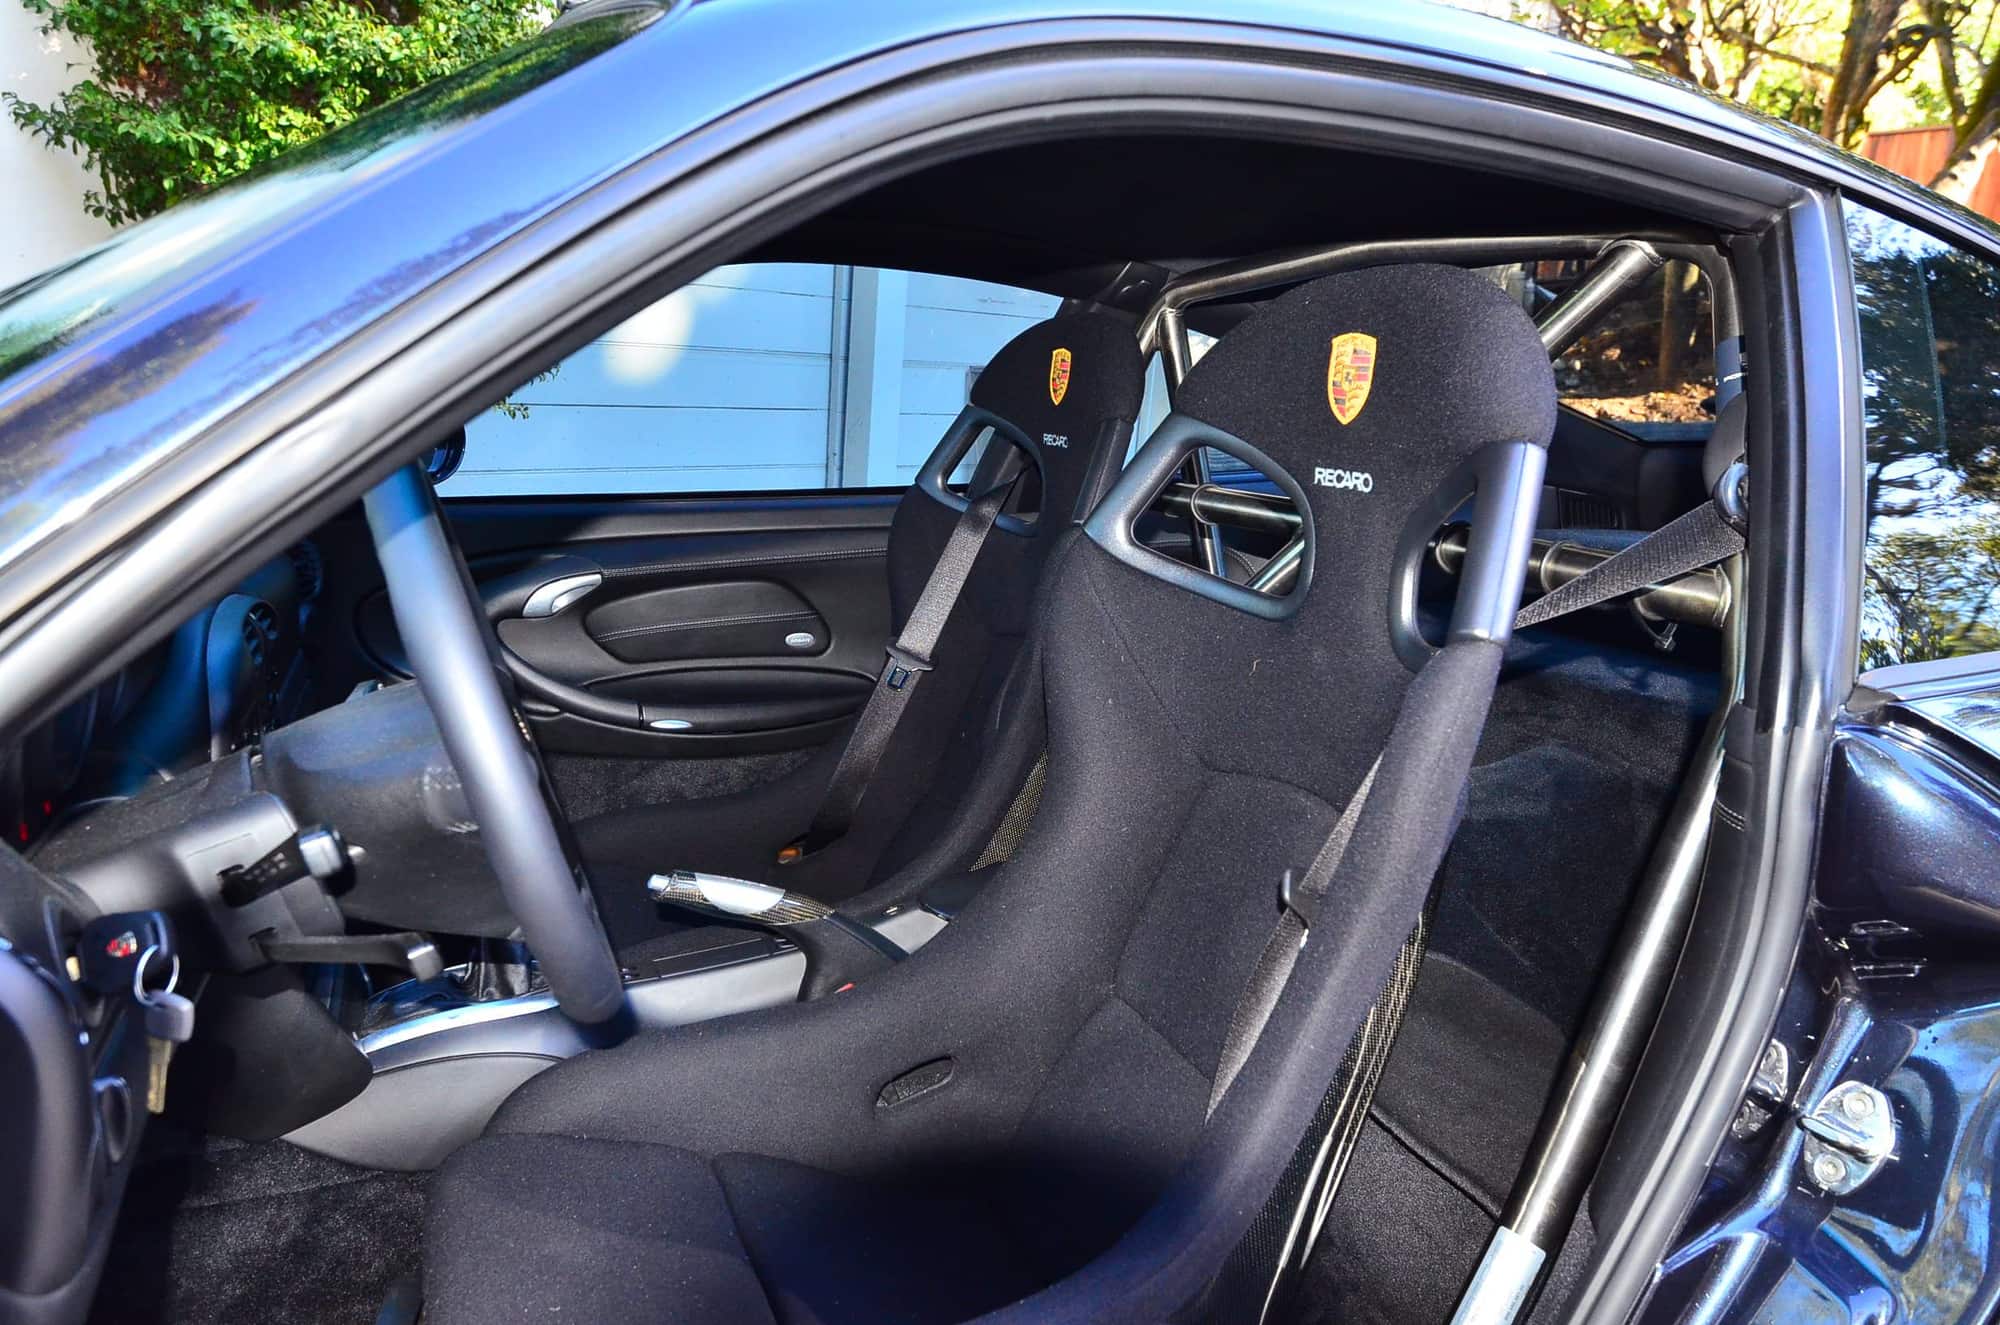 2004 Porsche GT3 - Extremely clean 996 GT3 under 10,000 miles - Used - VIN wp0ac29974s692616 - 6 cyl - 4WD - Manual - Coupe - Gray - San Carlos, CA 94070, United States